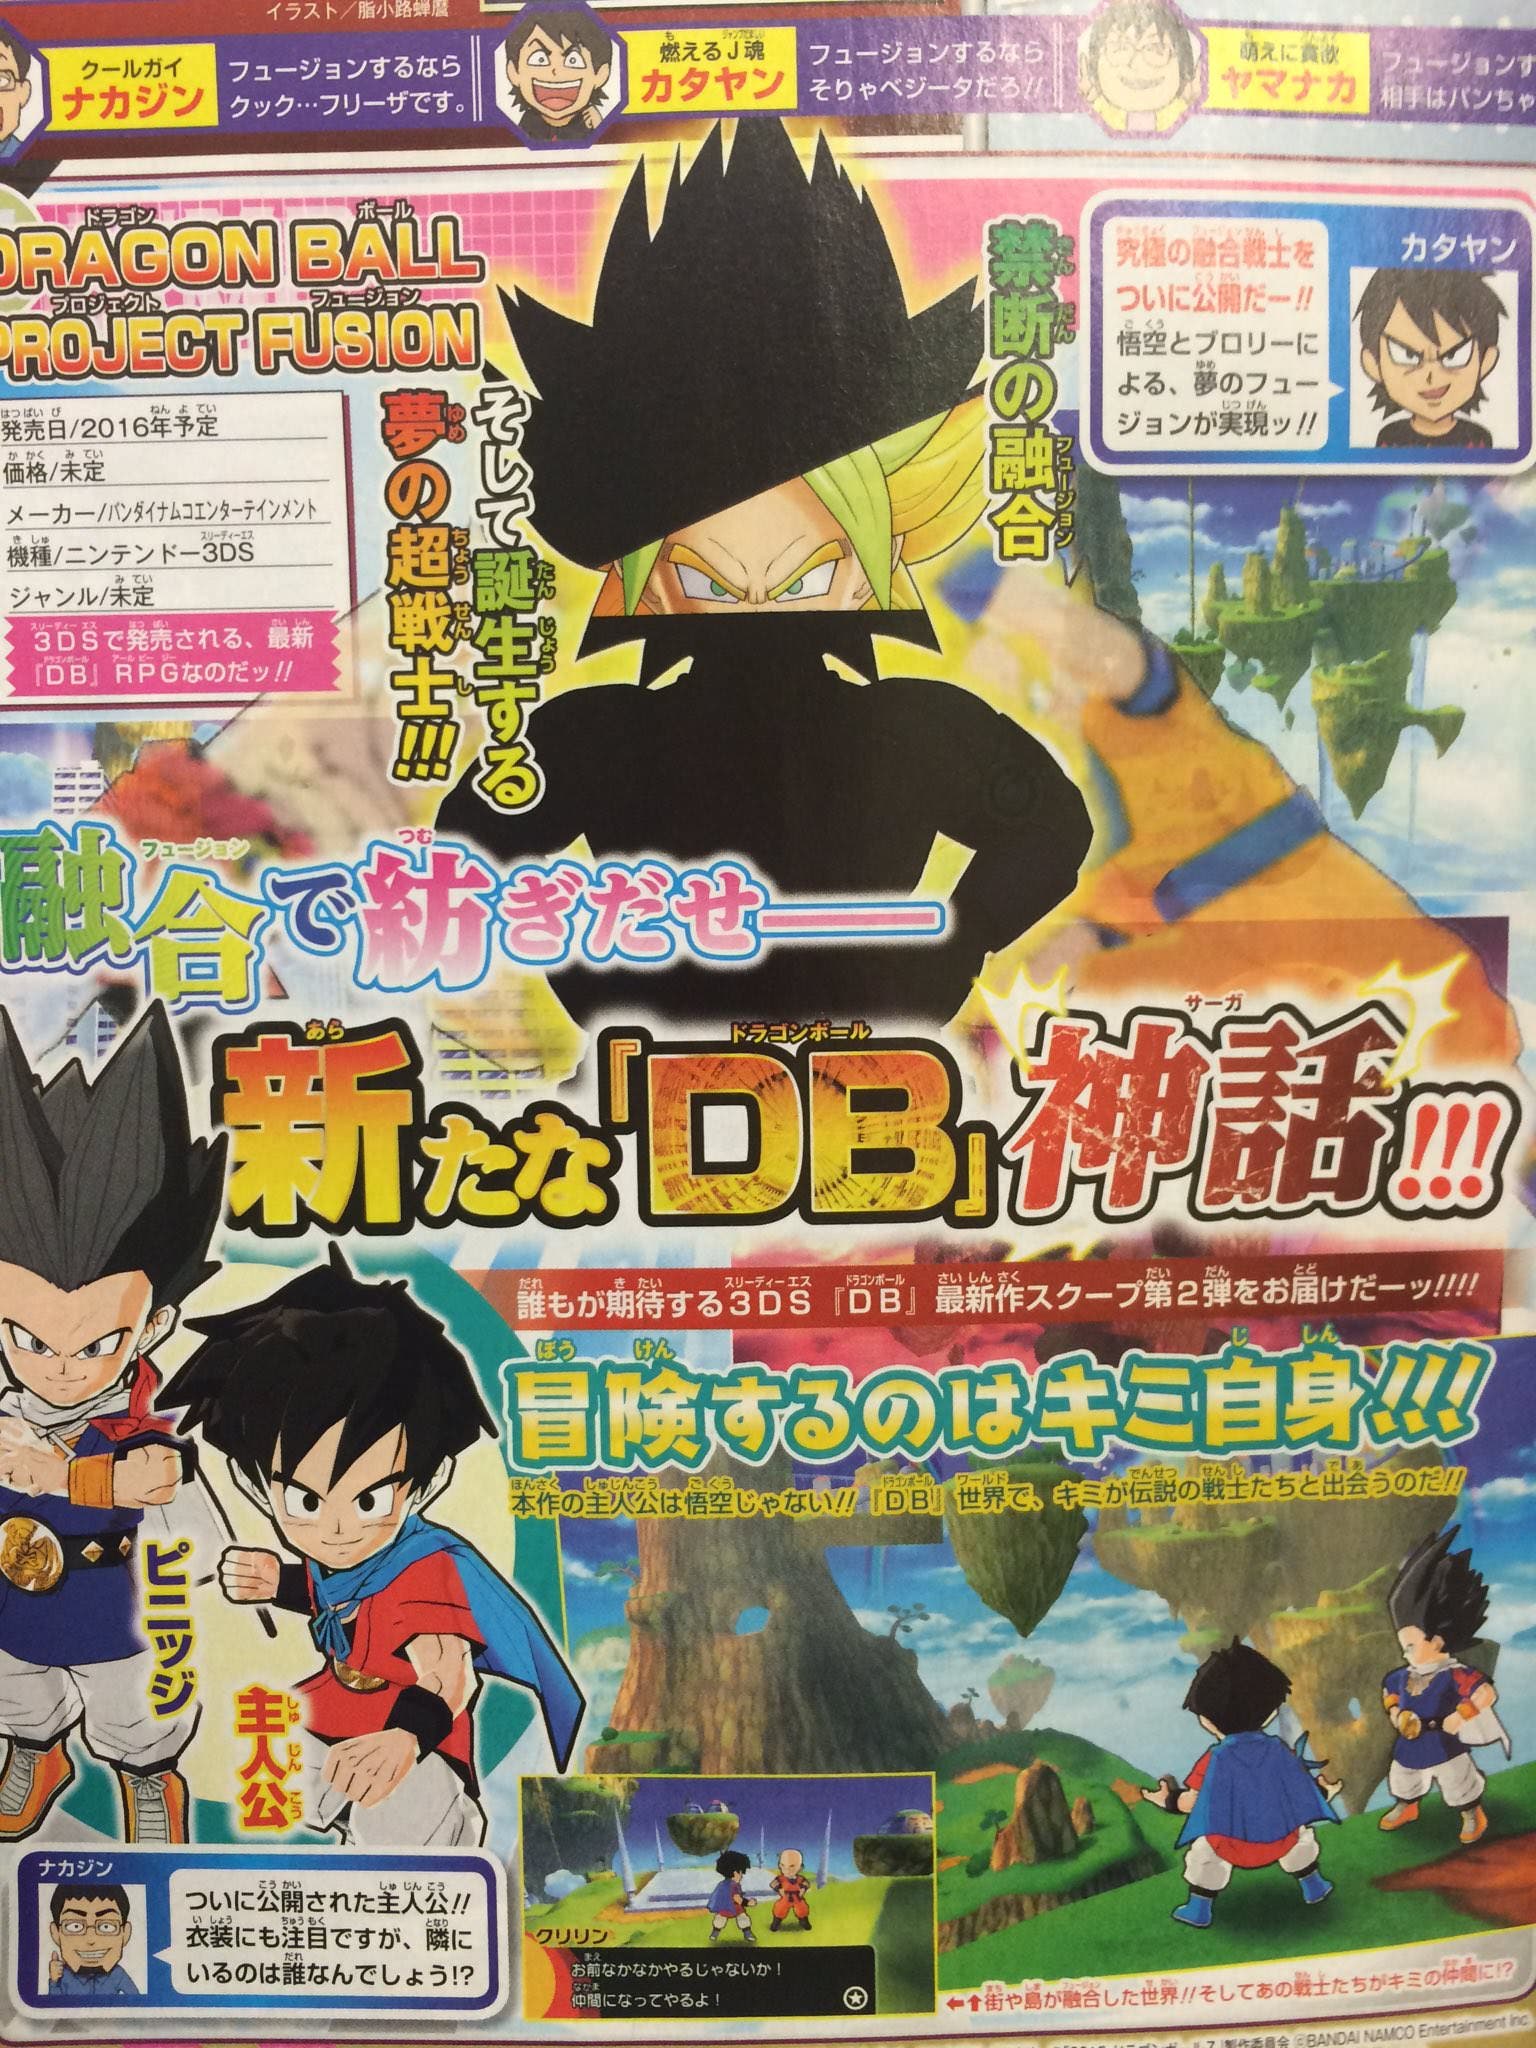 dragon ball project fusion scan